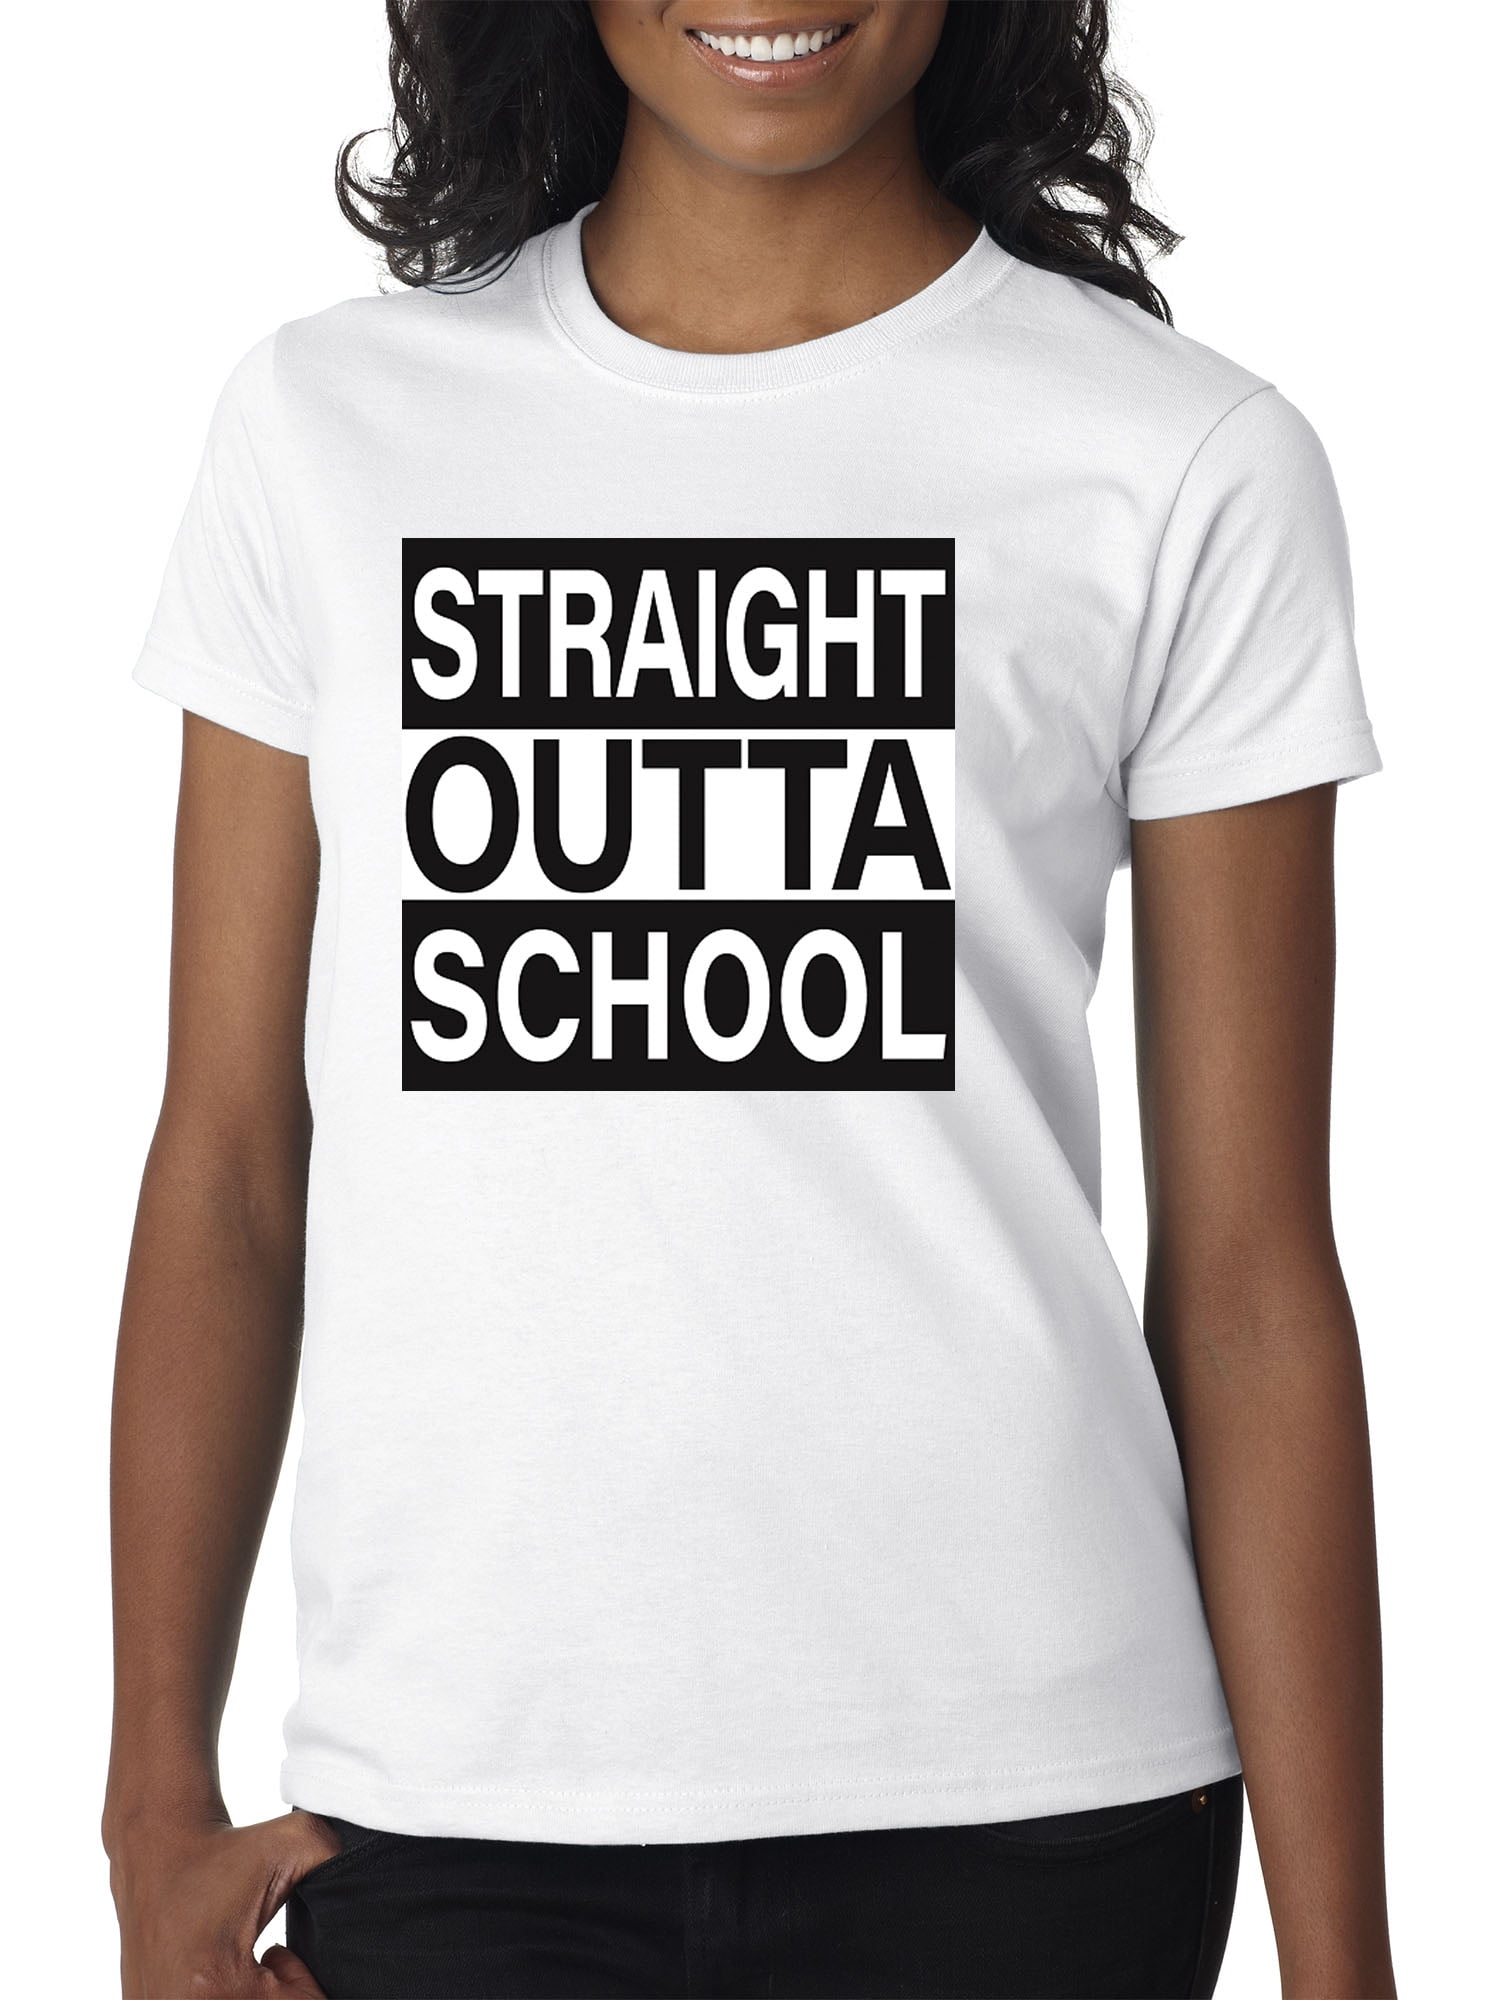 Hull Straight Outta 'ull Black Funny Compton NWA Style Unisex Jersey Short Sleeve Tee